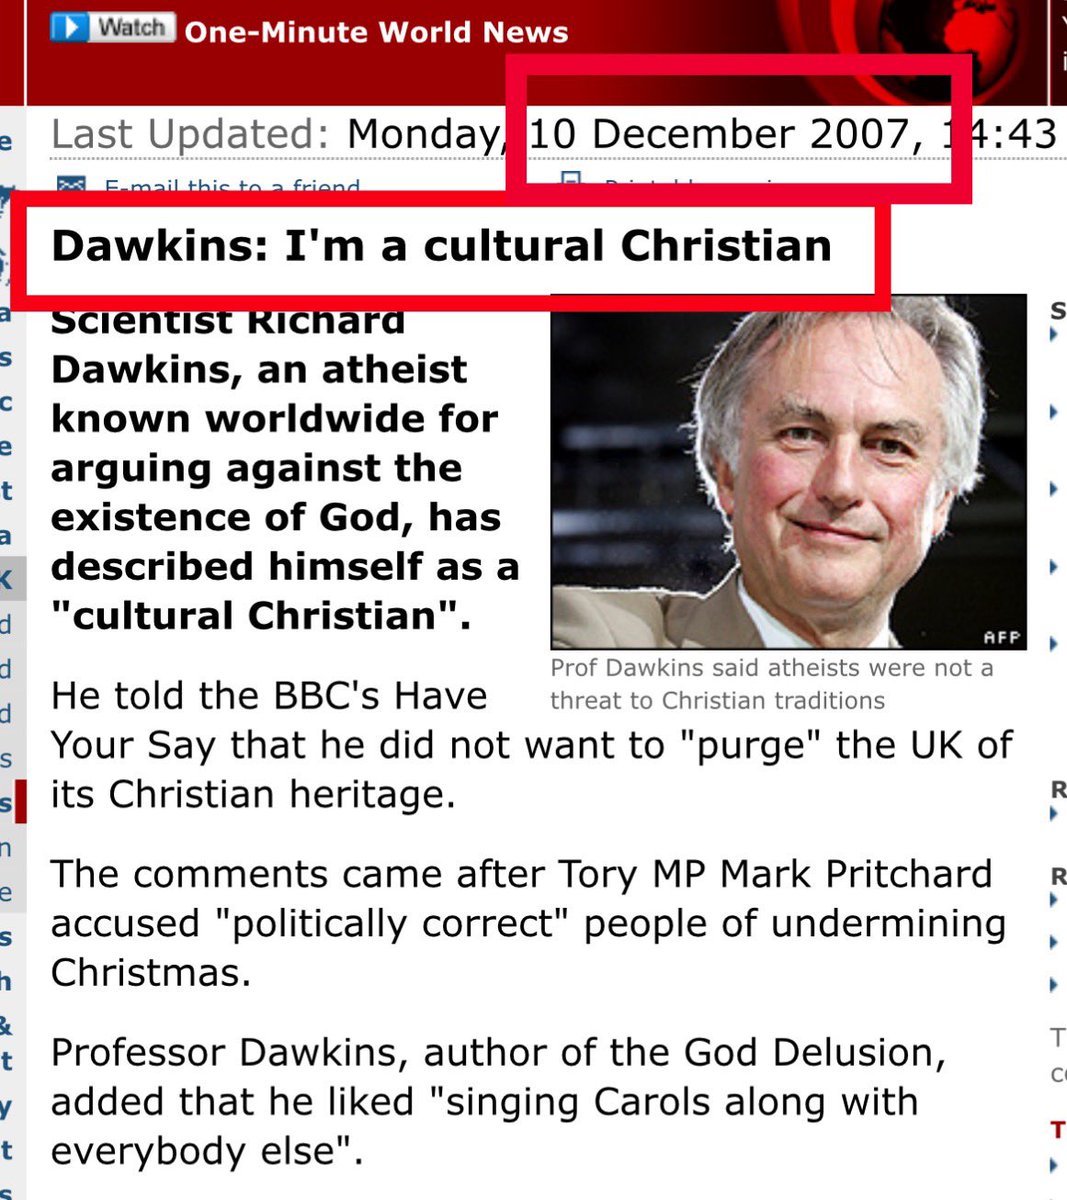 .@RichardDawkins has been saying he is a “cultural Christian” for almost twenty years. I quoted him in my book, “The Atheist Muslim,” for which he graciously wrote the cover blurb. This is not news, my God-deluded Christian brethren. The idea is still the same: while…